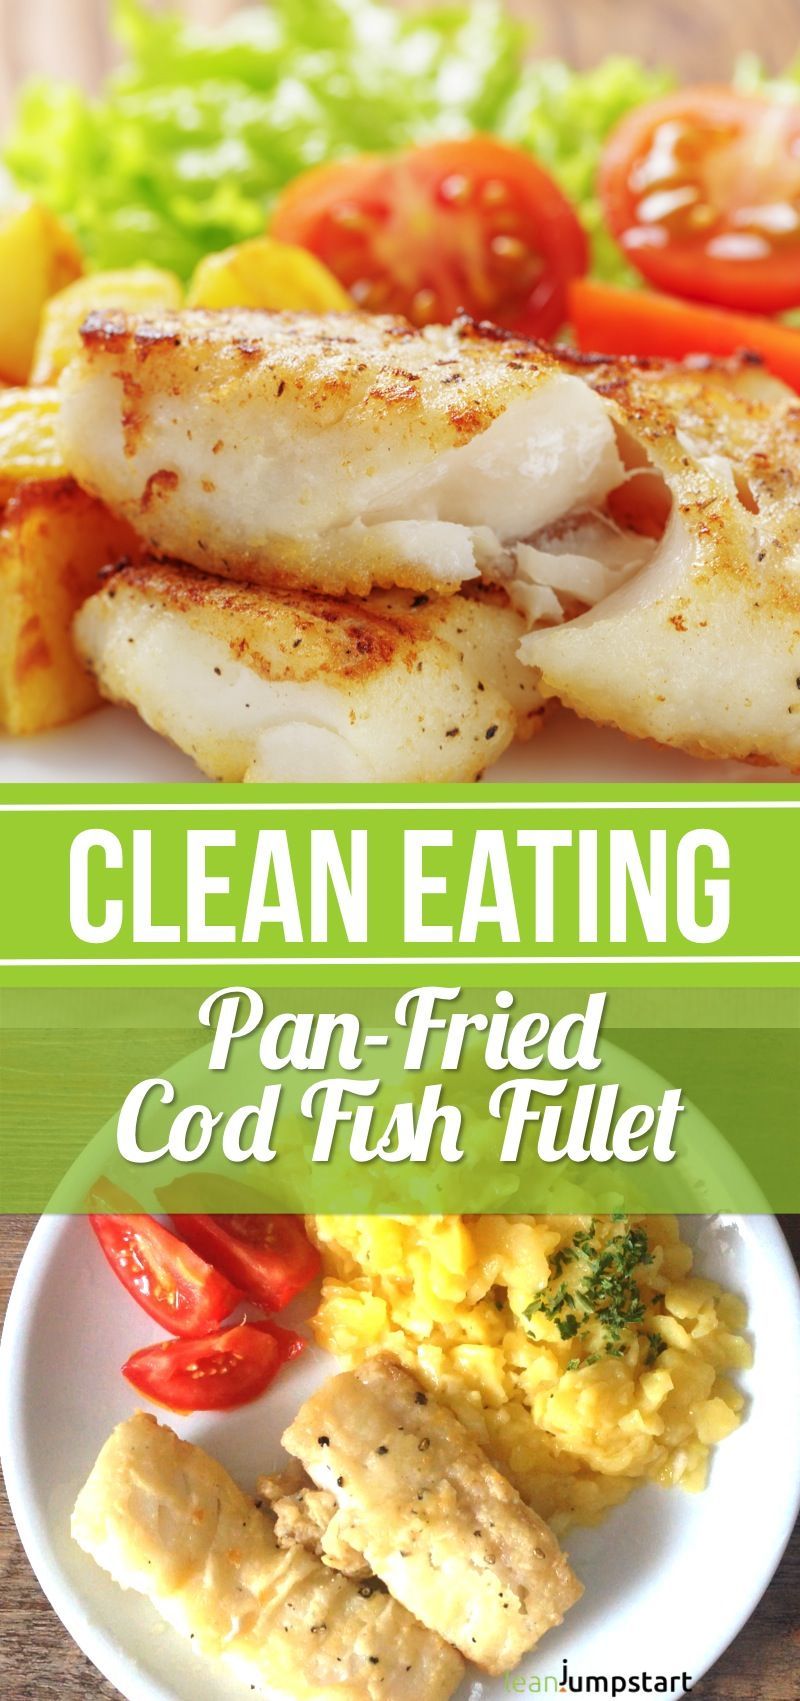 From all codfish recipes I know, this pan-fried clean eating cod fish might be the quickest. It is very simple to do at home.